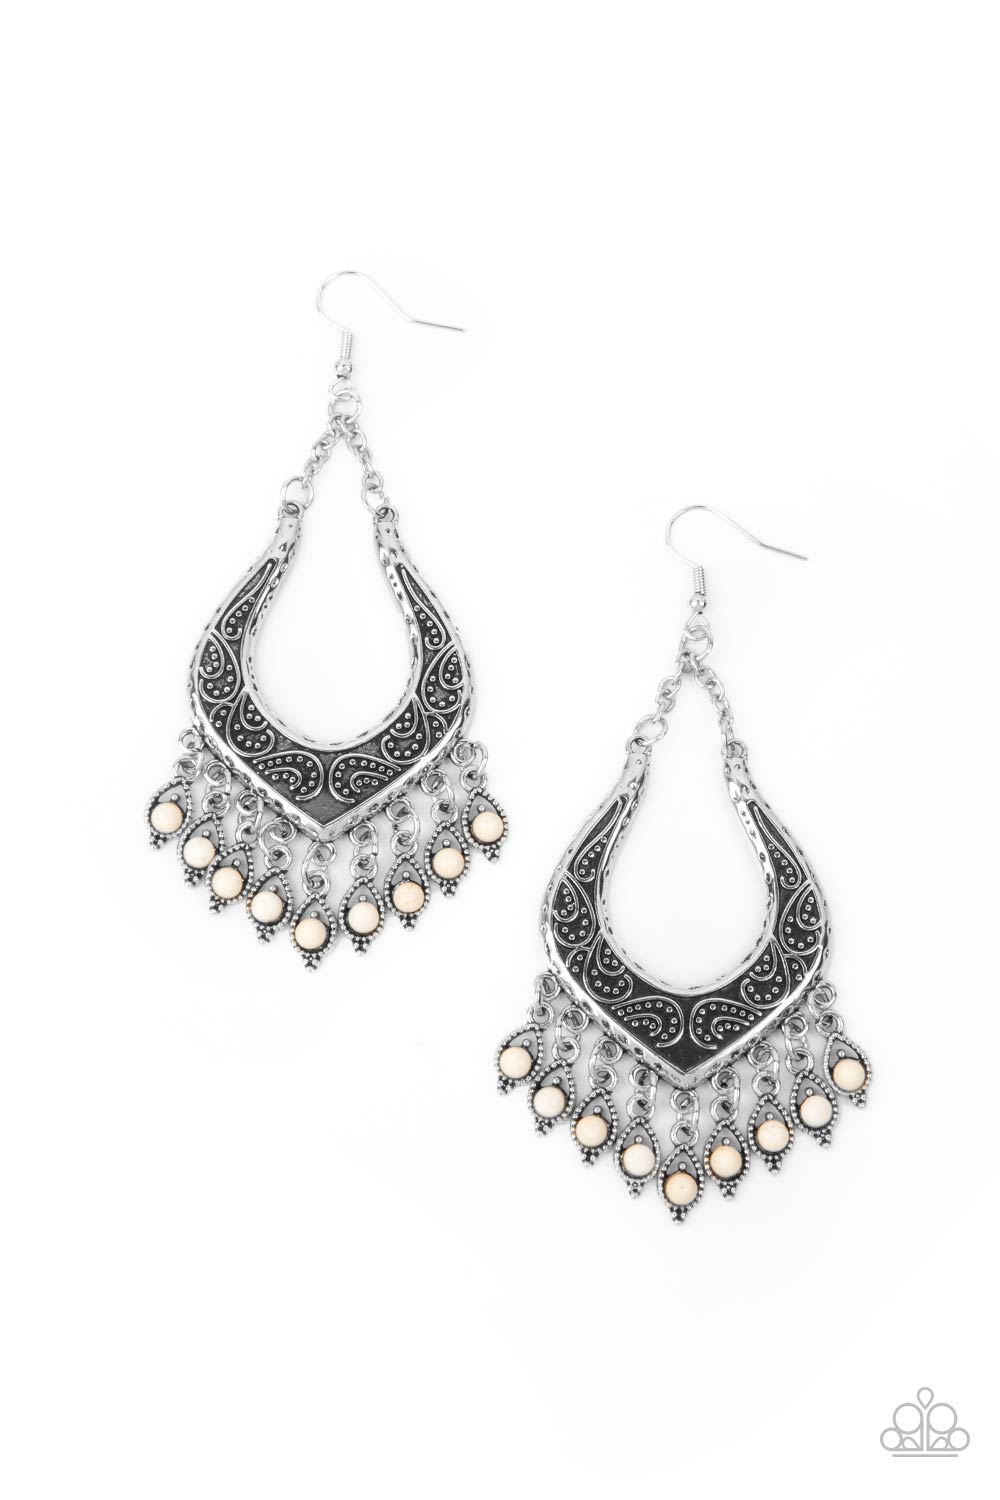 Dotted with dainty white stones, decorative silver frames swing from the bottom of an ornately studded silver frame, creating a simply seasonal fringe. Earring attaches to a standard fishhook fitting.